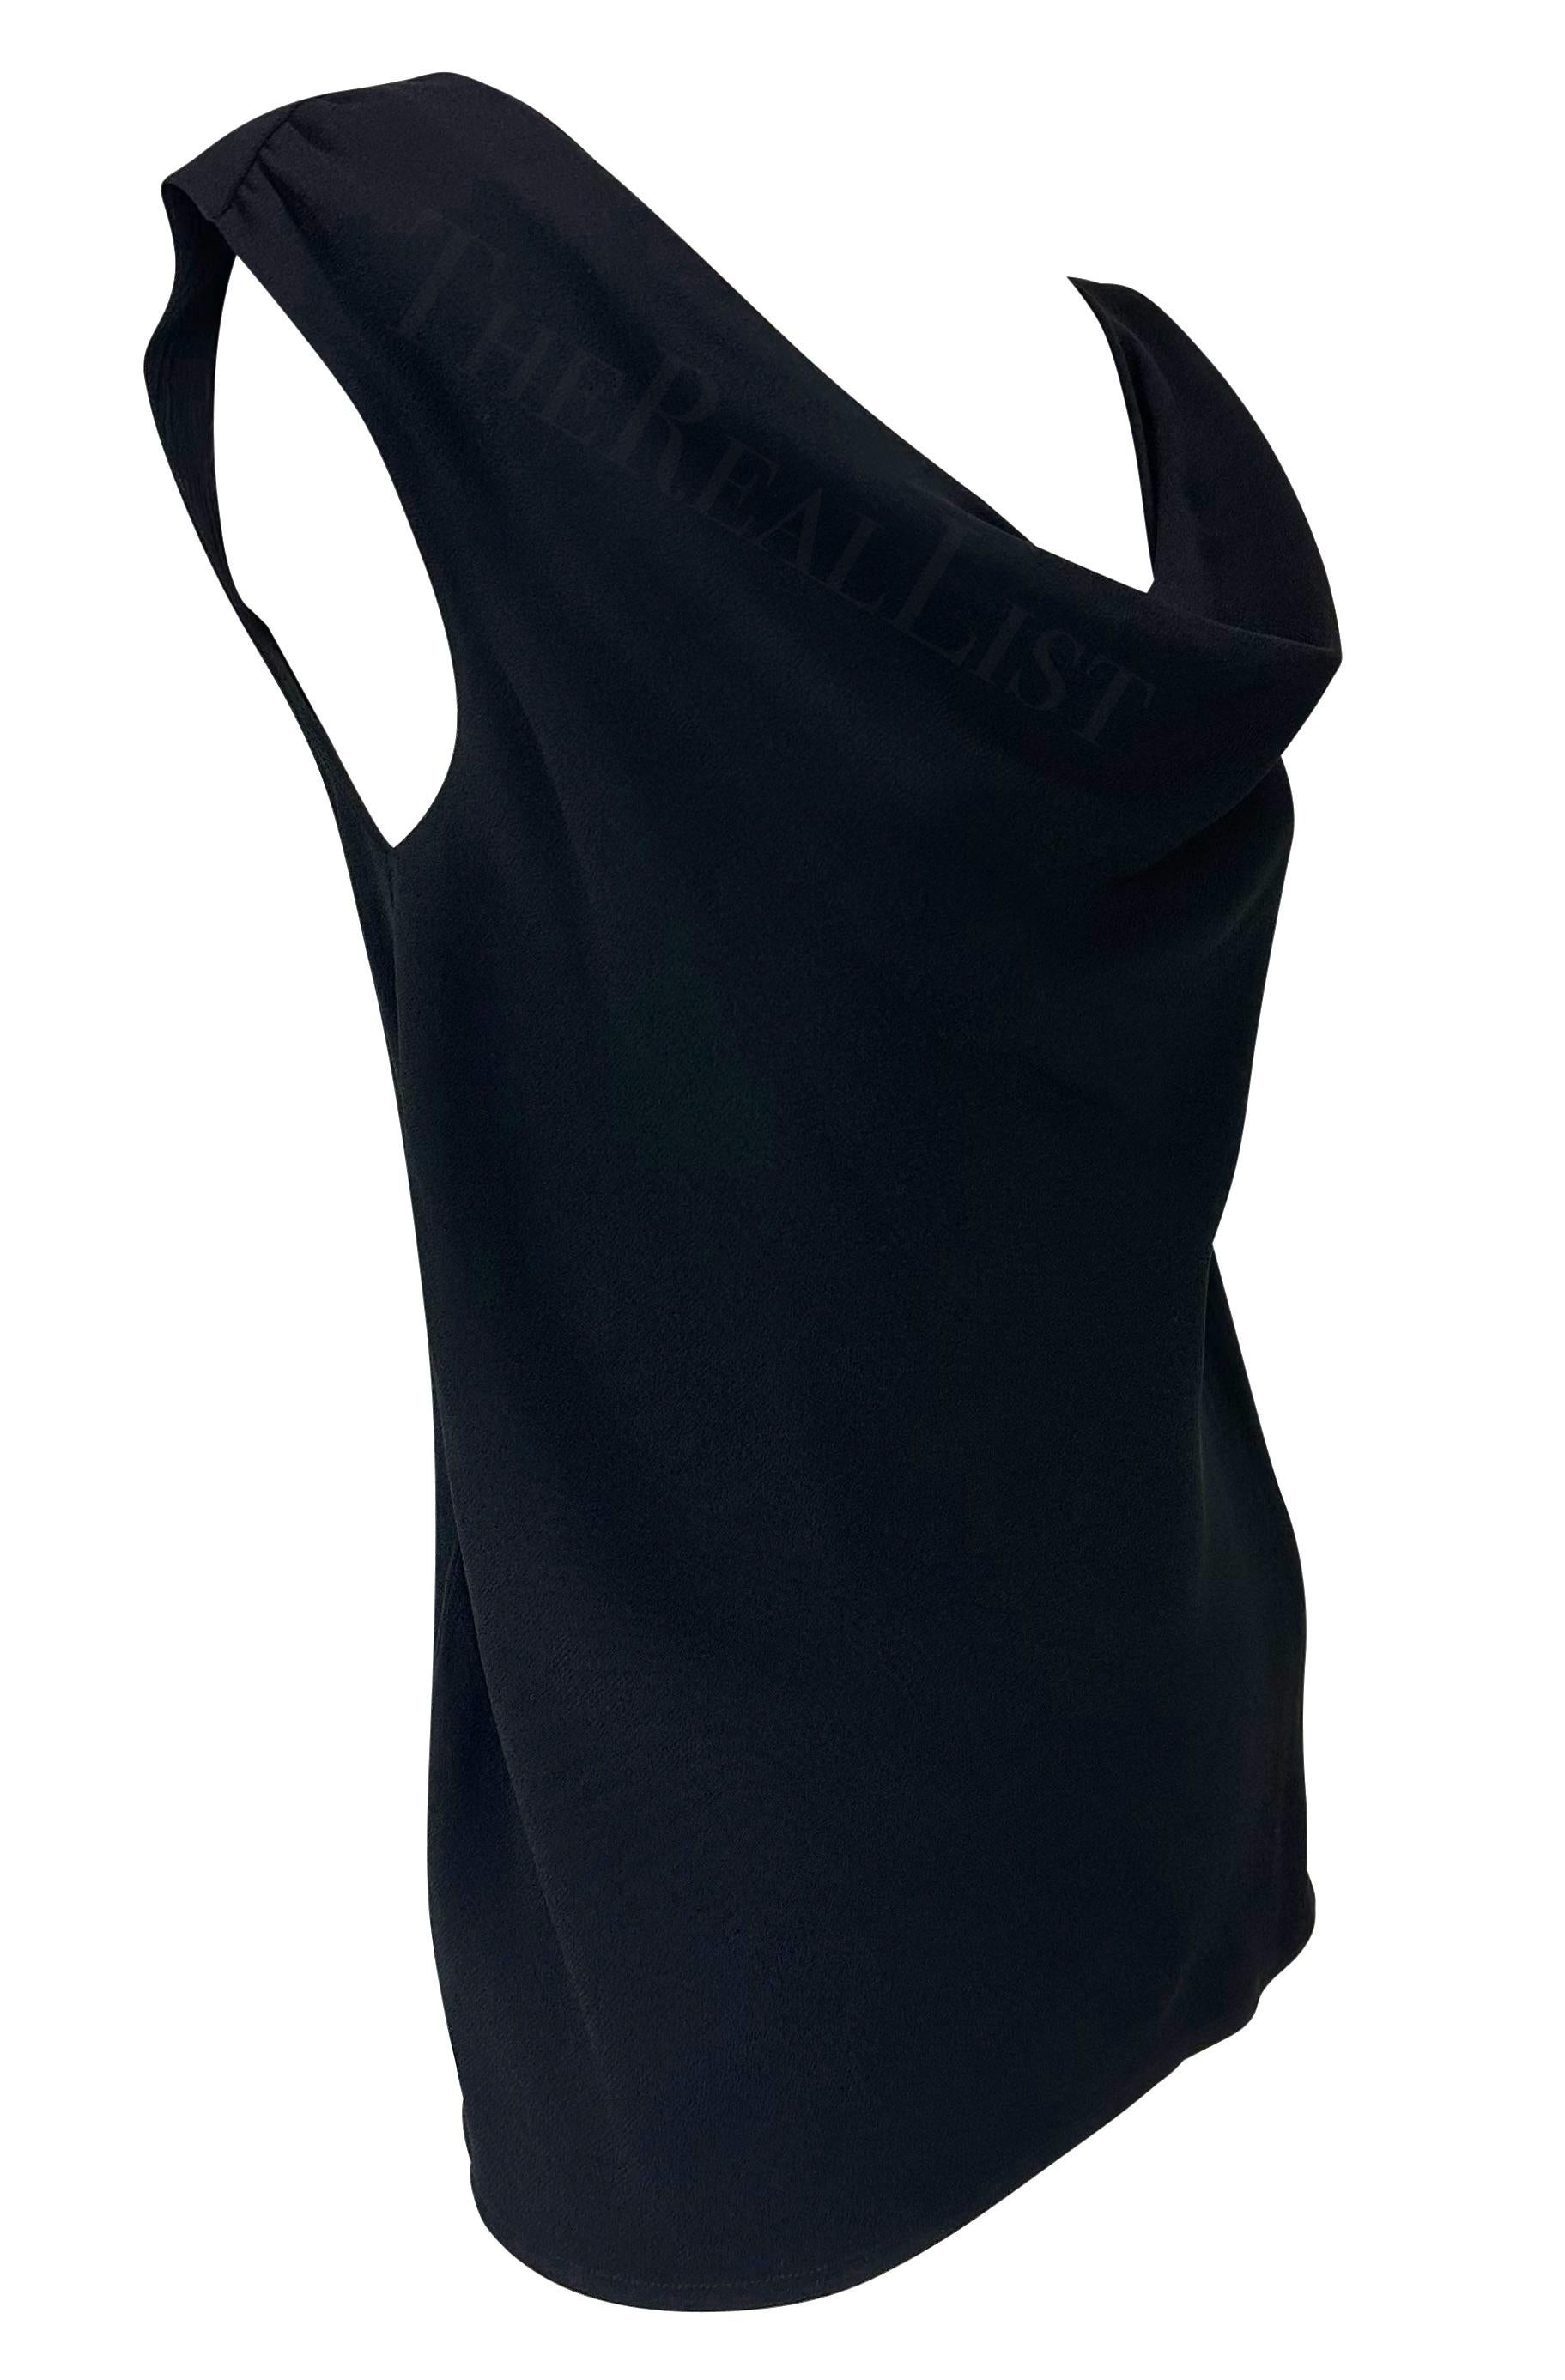 1980s Saint Laurent Rive Gauche Black Cowl Neck Sleeveless Top In Excellent Condition For Sale In West Hollywood, CA